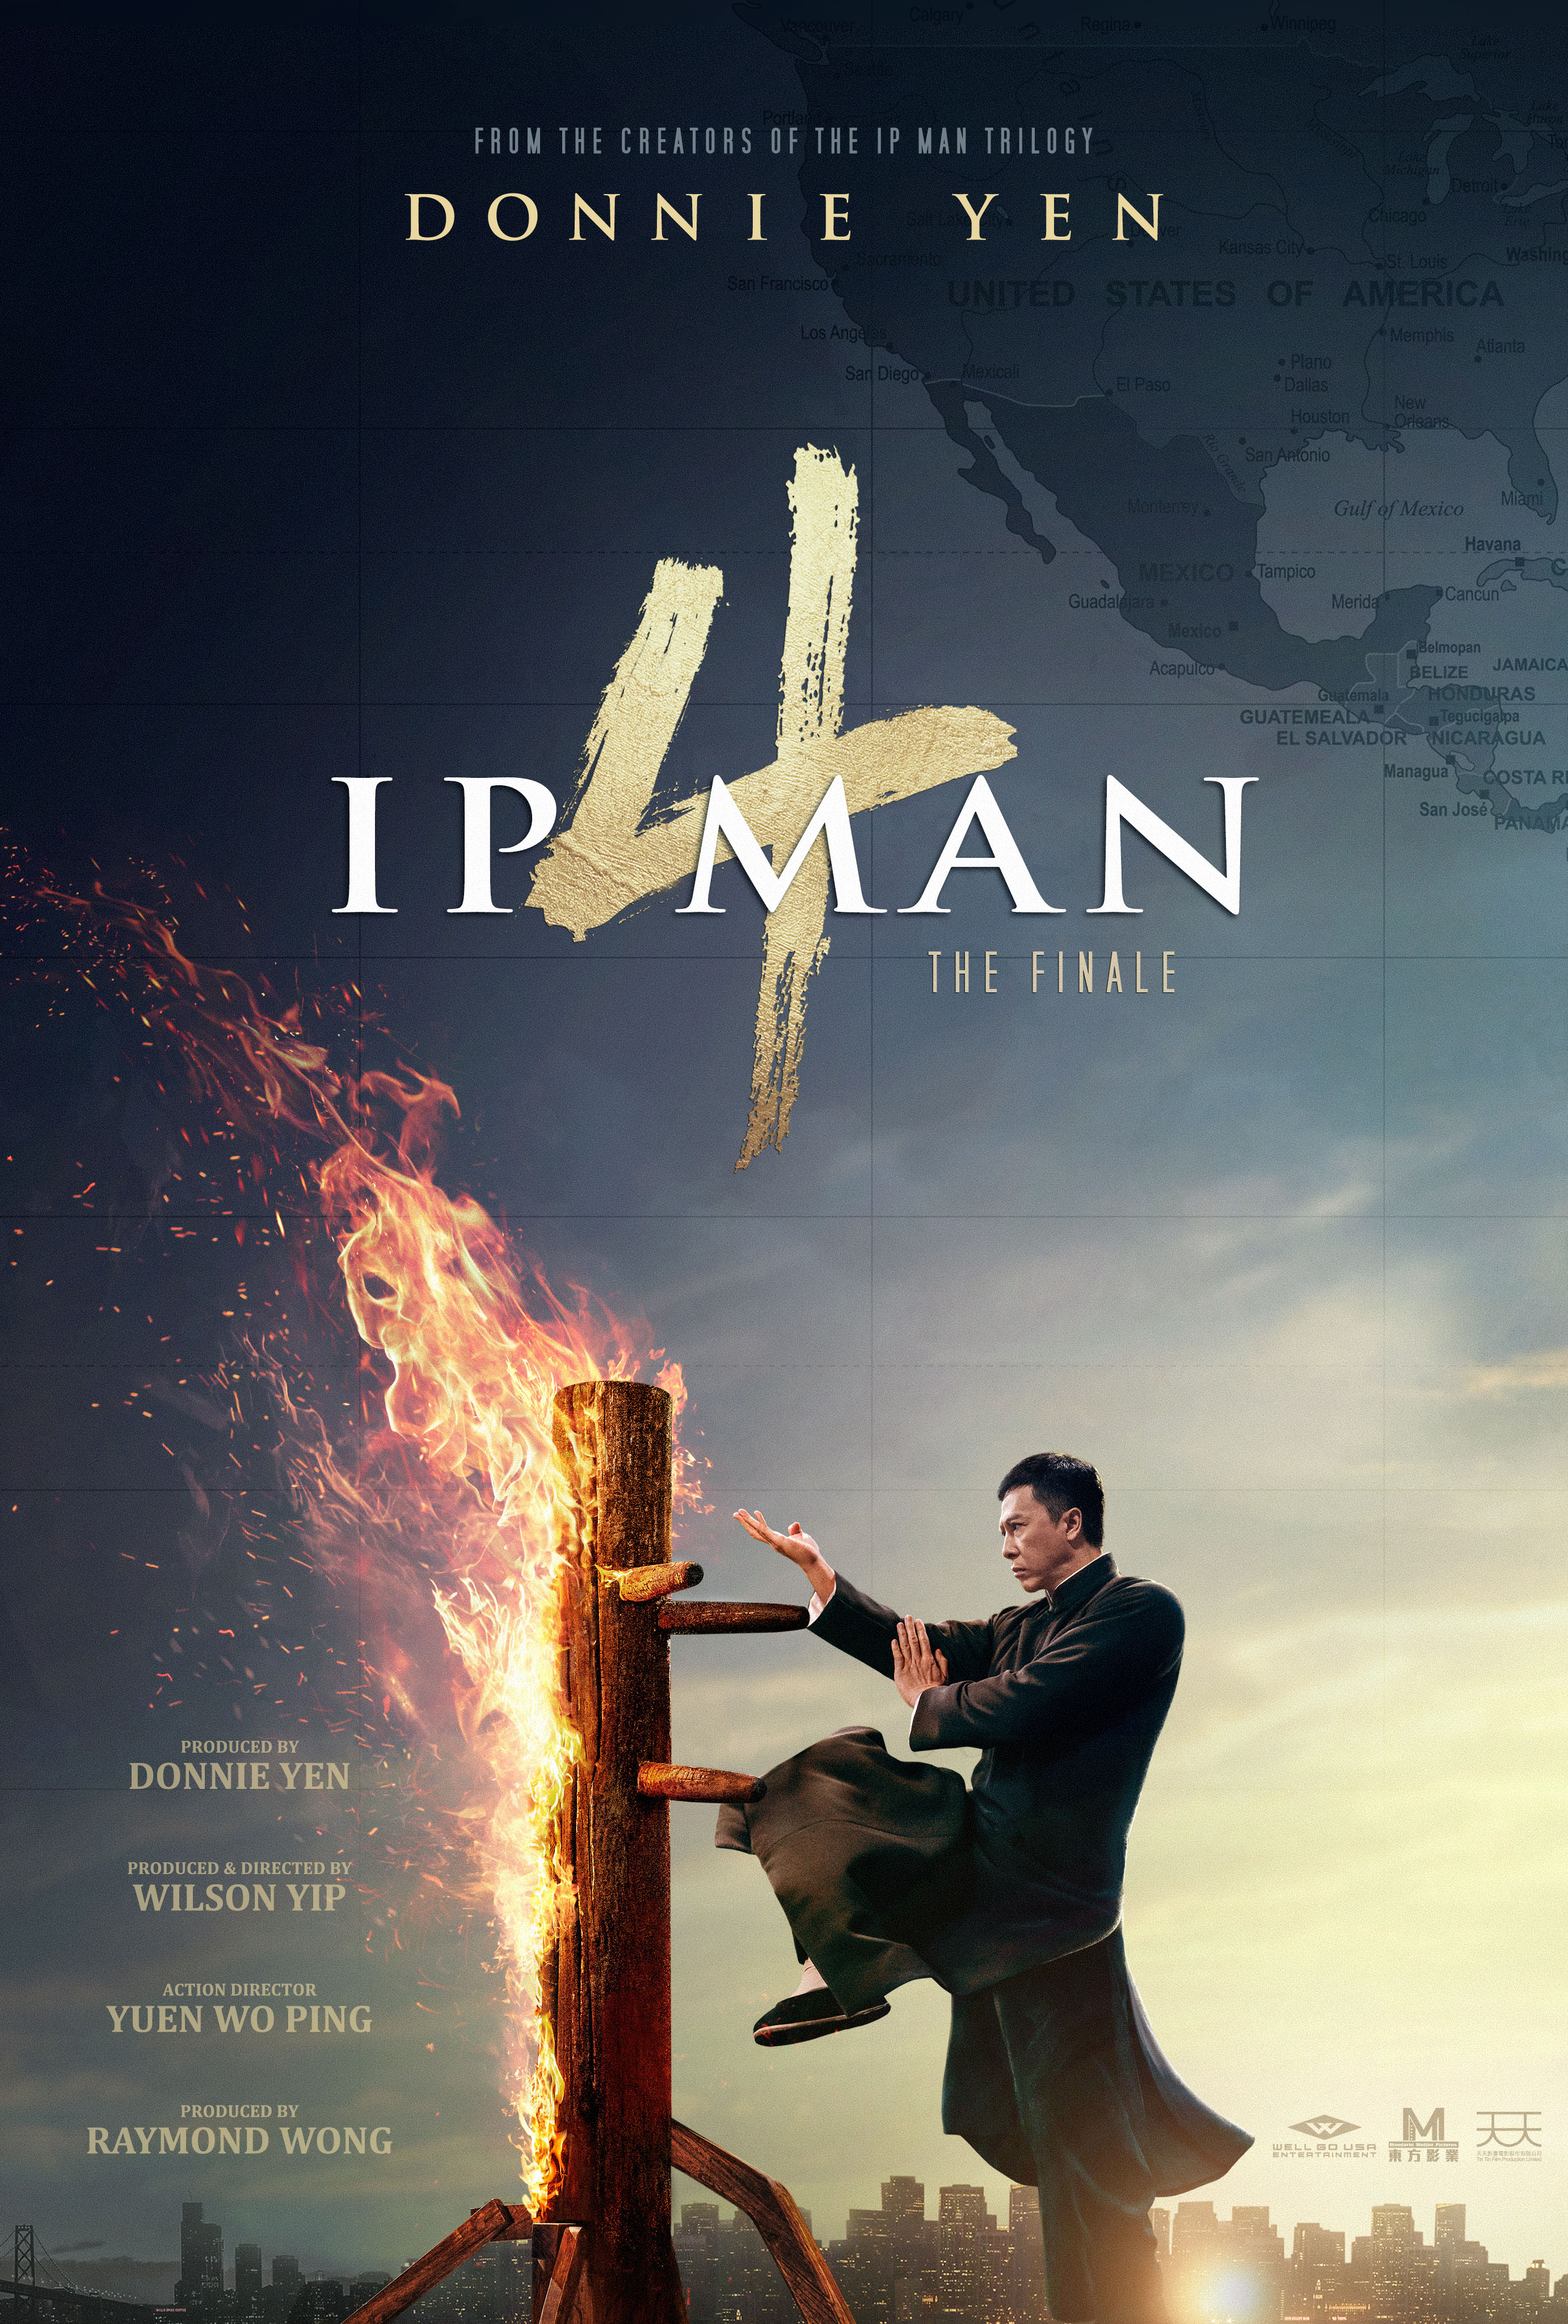 Ip Man 4 The Finale 2019 Dub in Hindi Full Movie